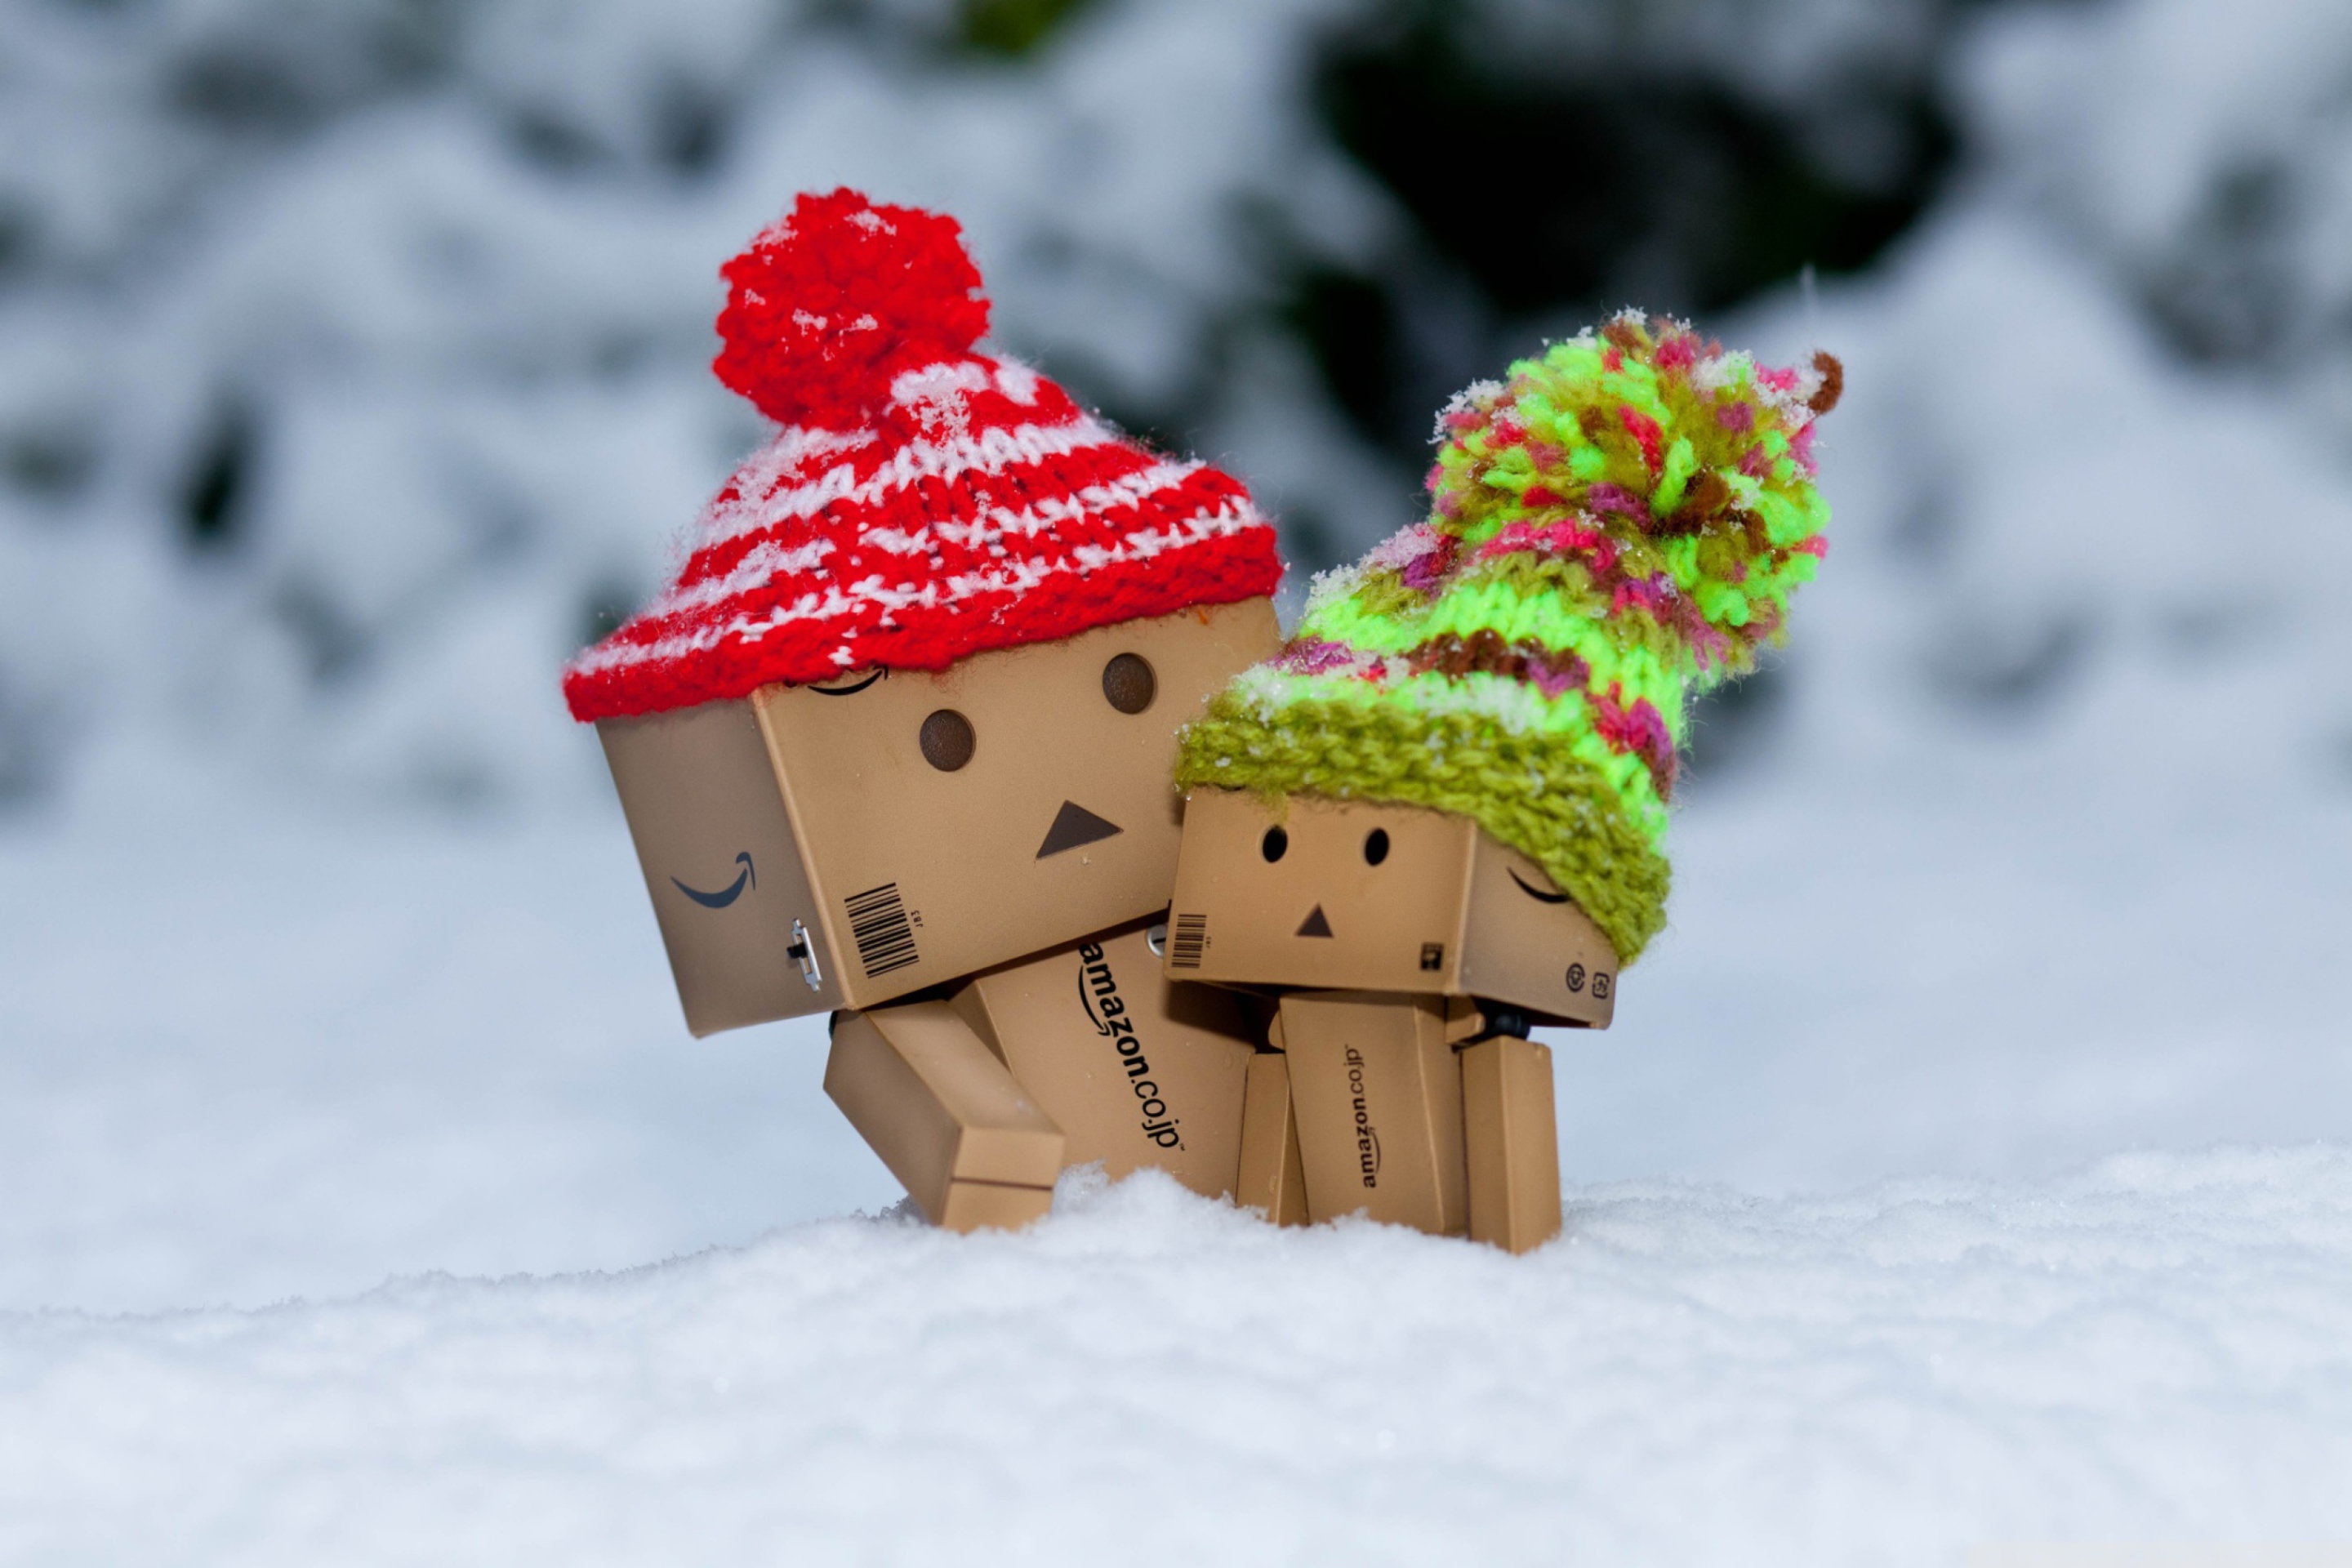 Danbo Is Scared By So Much Snow wallpaper 2880x1920